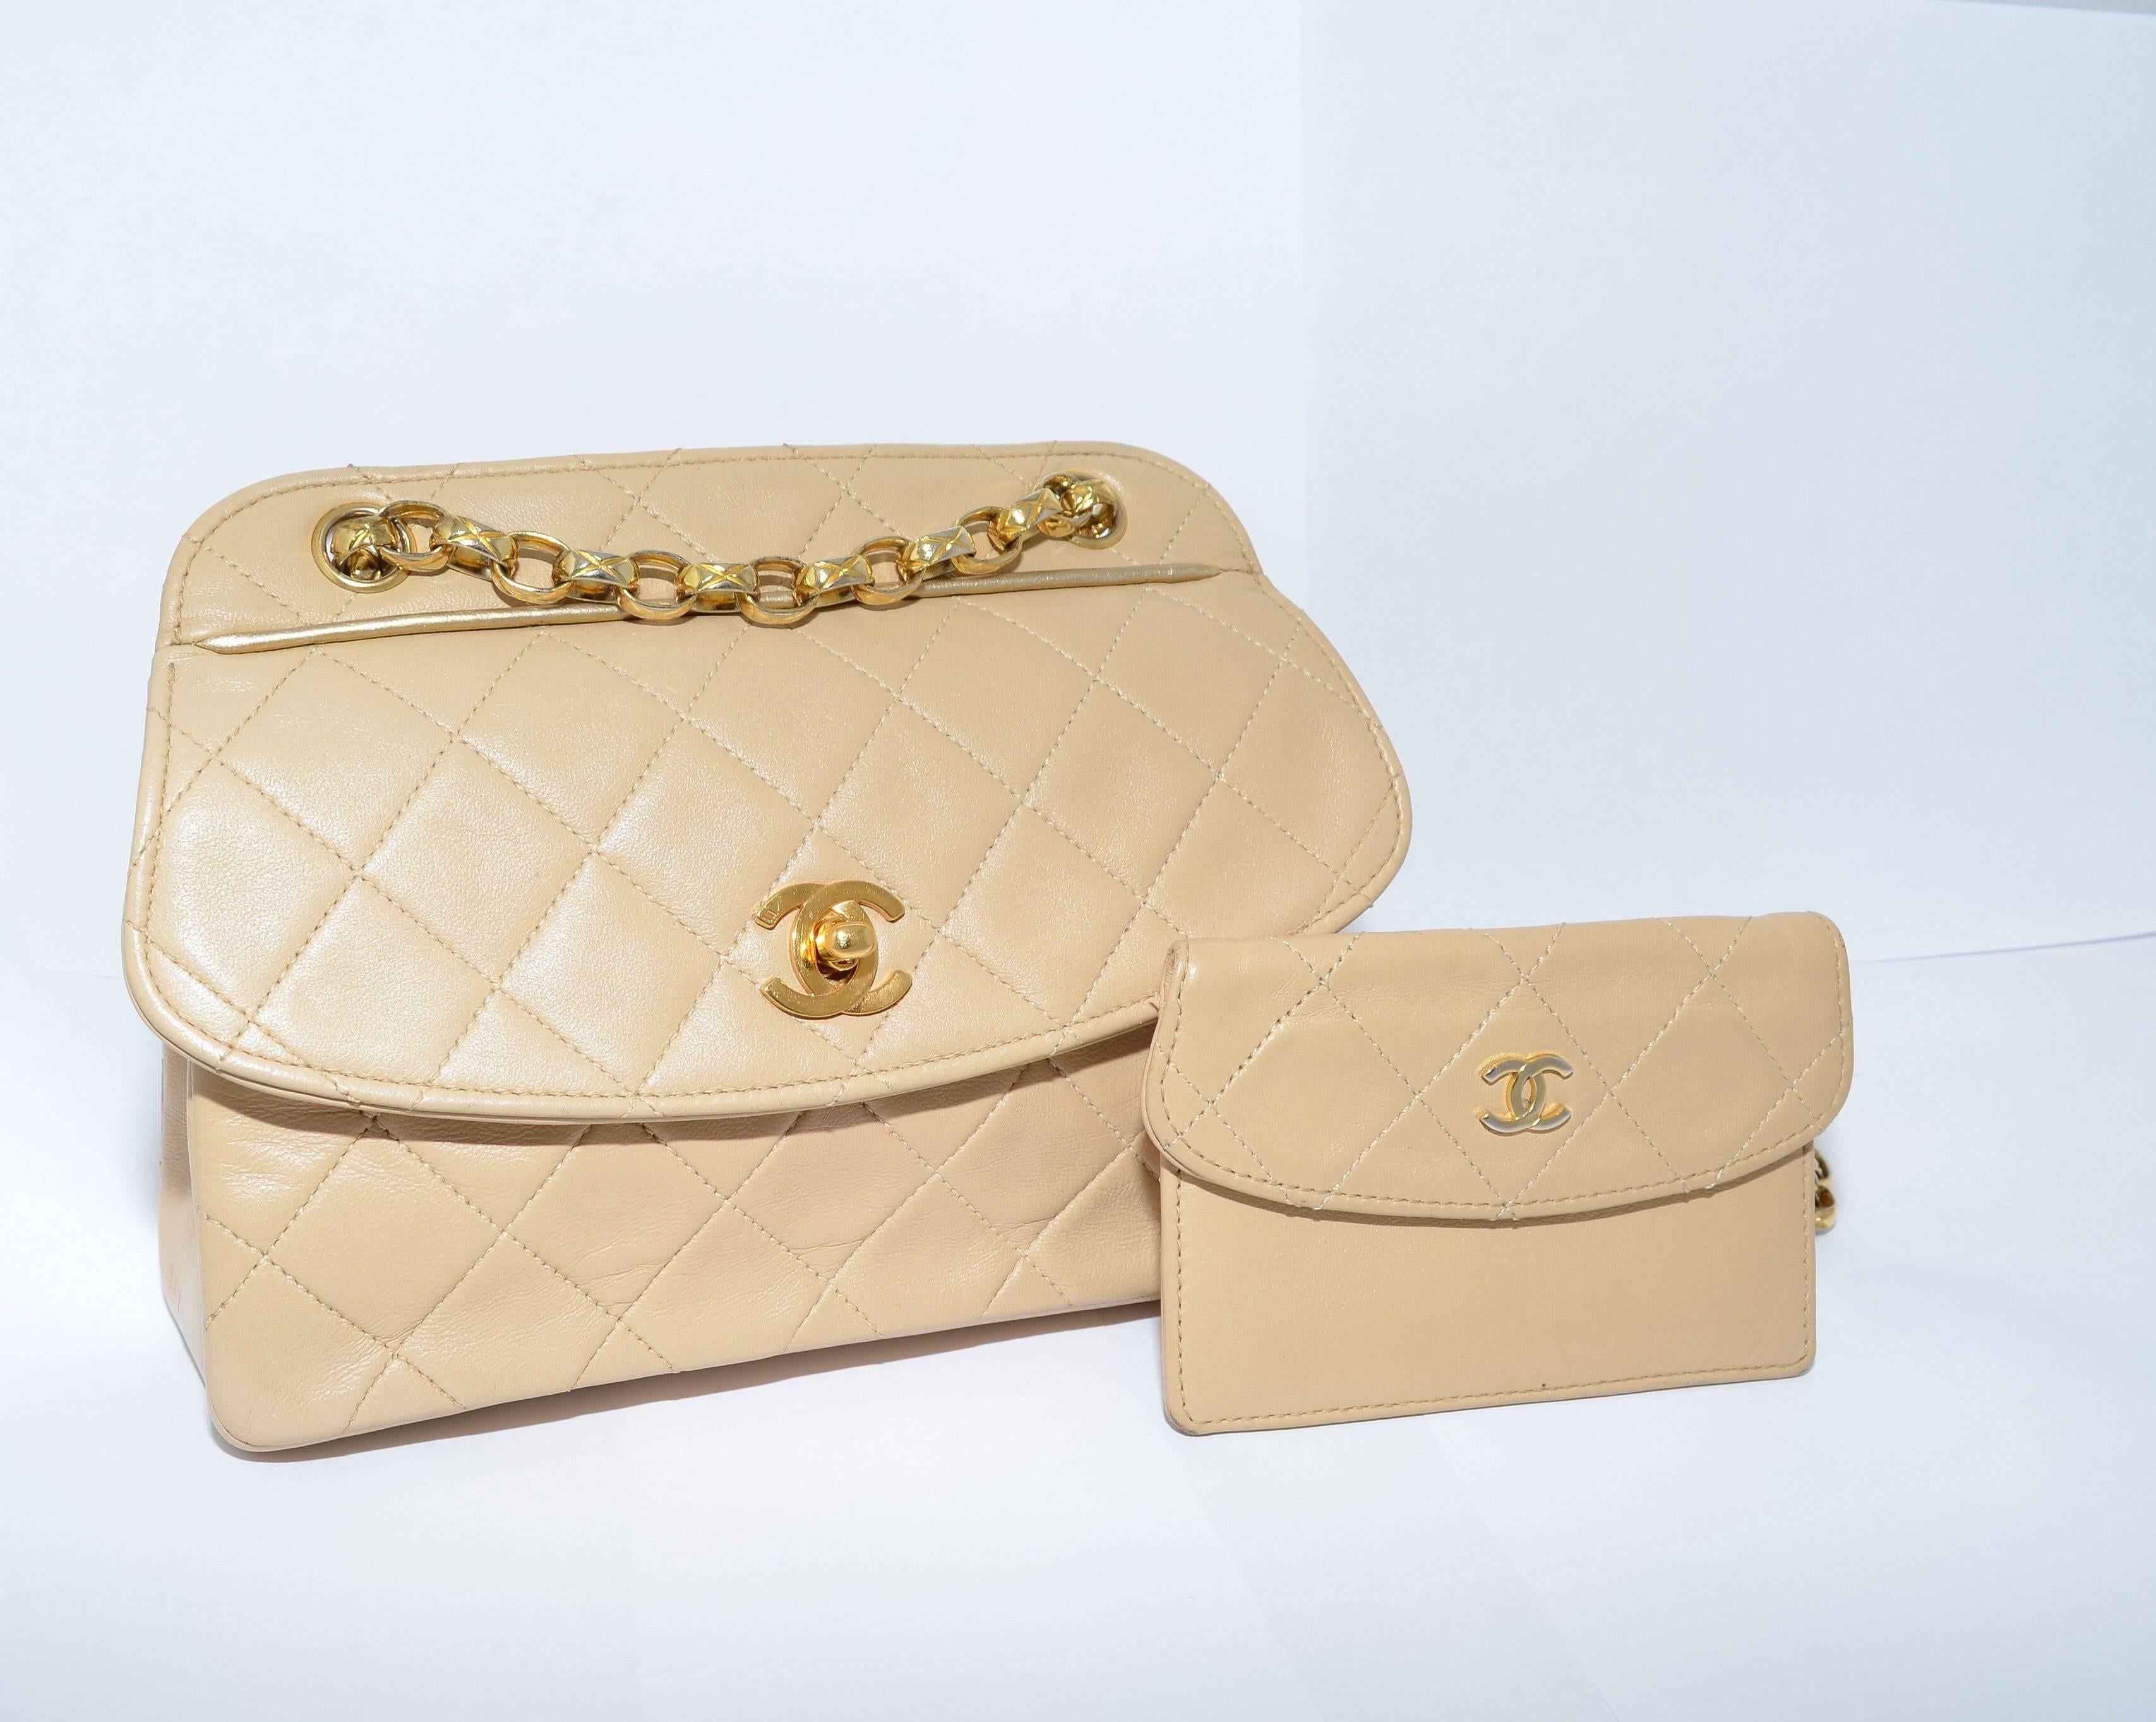 Chanel 1989-1991 Vintage Quilted Mini Flap Bag w/ Quilted Gold Chain Crossbody

Chanel bag from 1989-1991 is featured in a quilted beige leather, gold-tone hardware with a signature turnlock closure, metallic gold trim at the handle and back slip